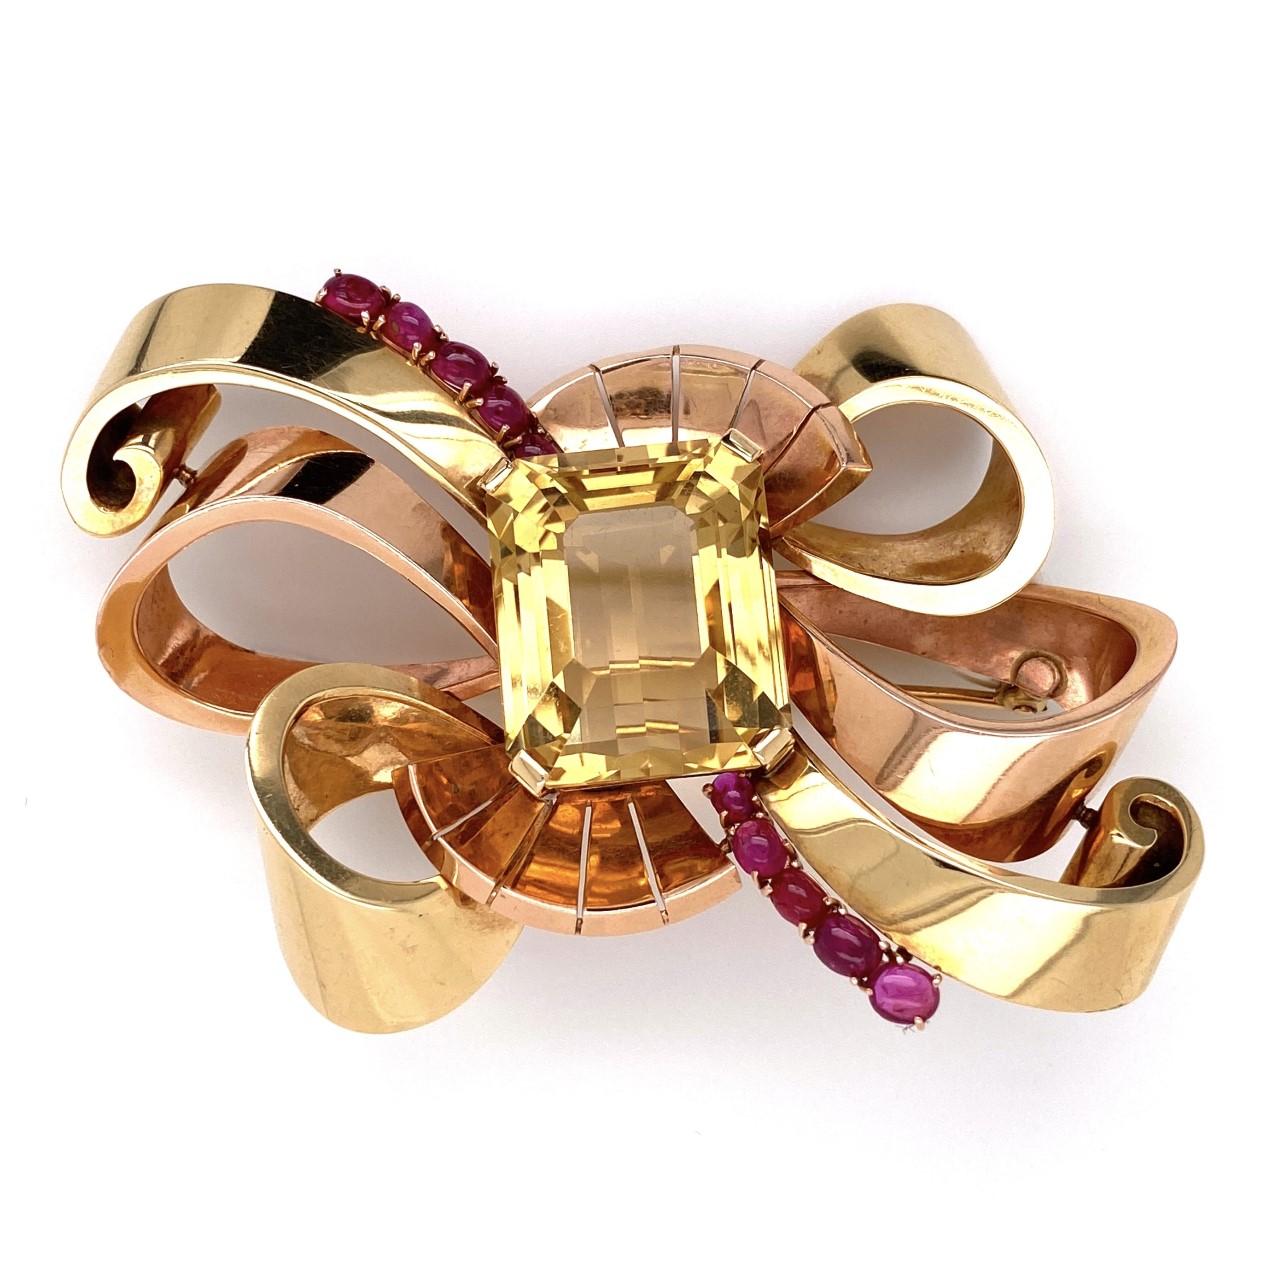 Cabochon 14 Karat Retro Green and Rose Gold Brooch with 49 Carat Citrine and Rubies 41.6g